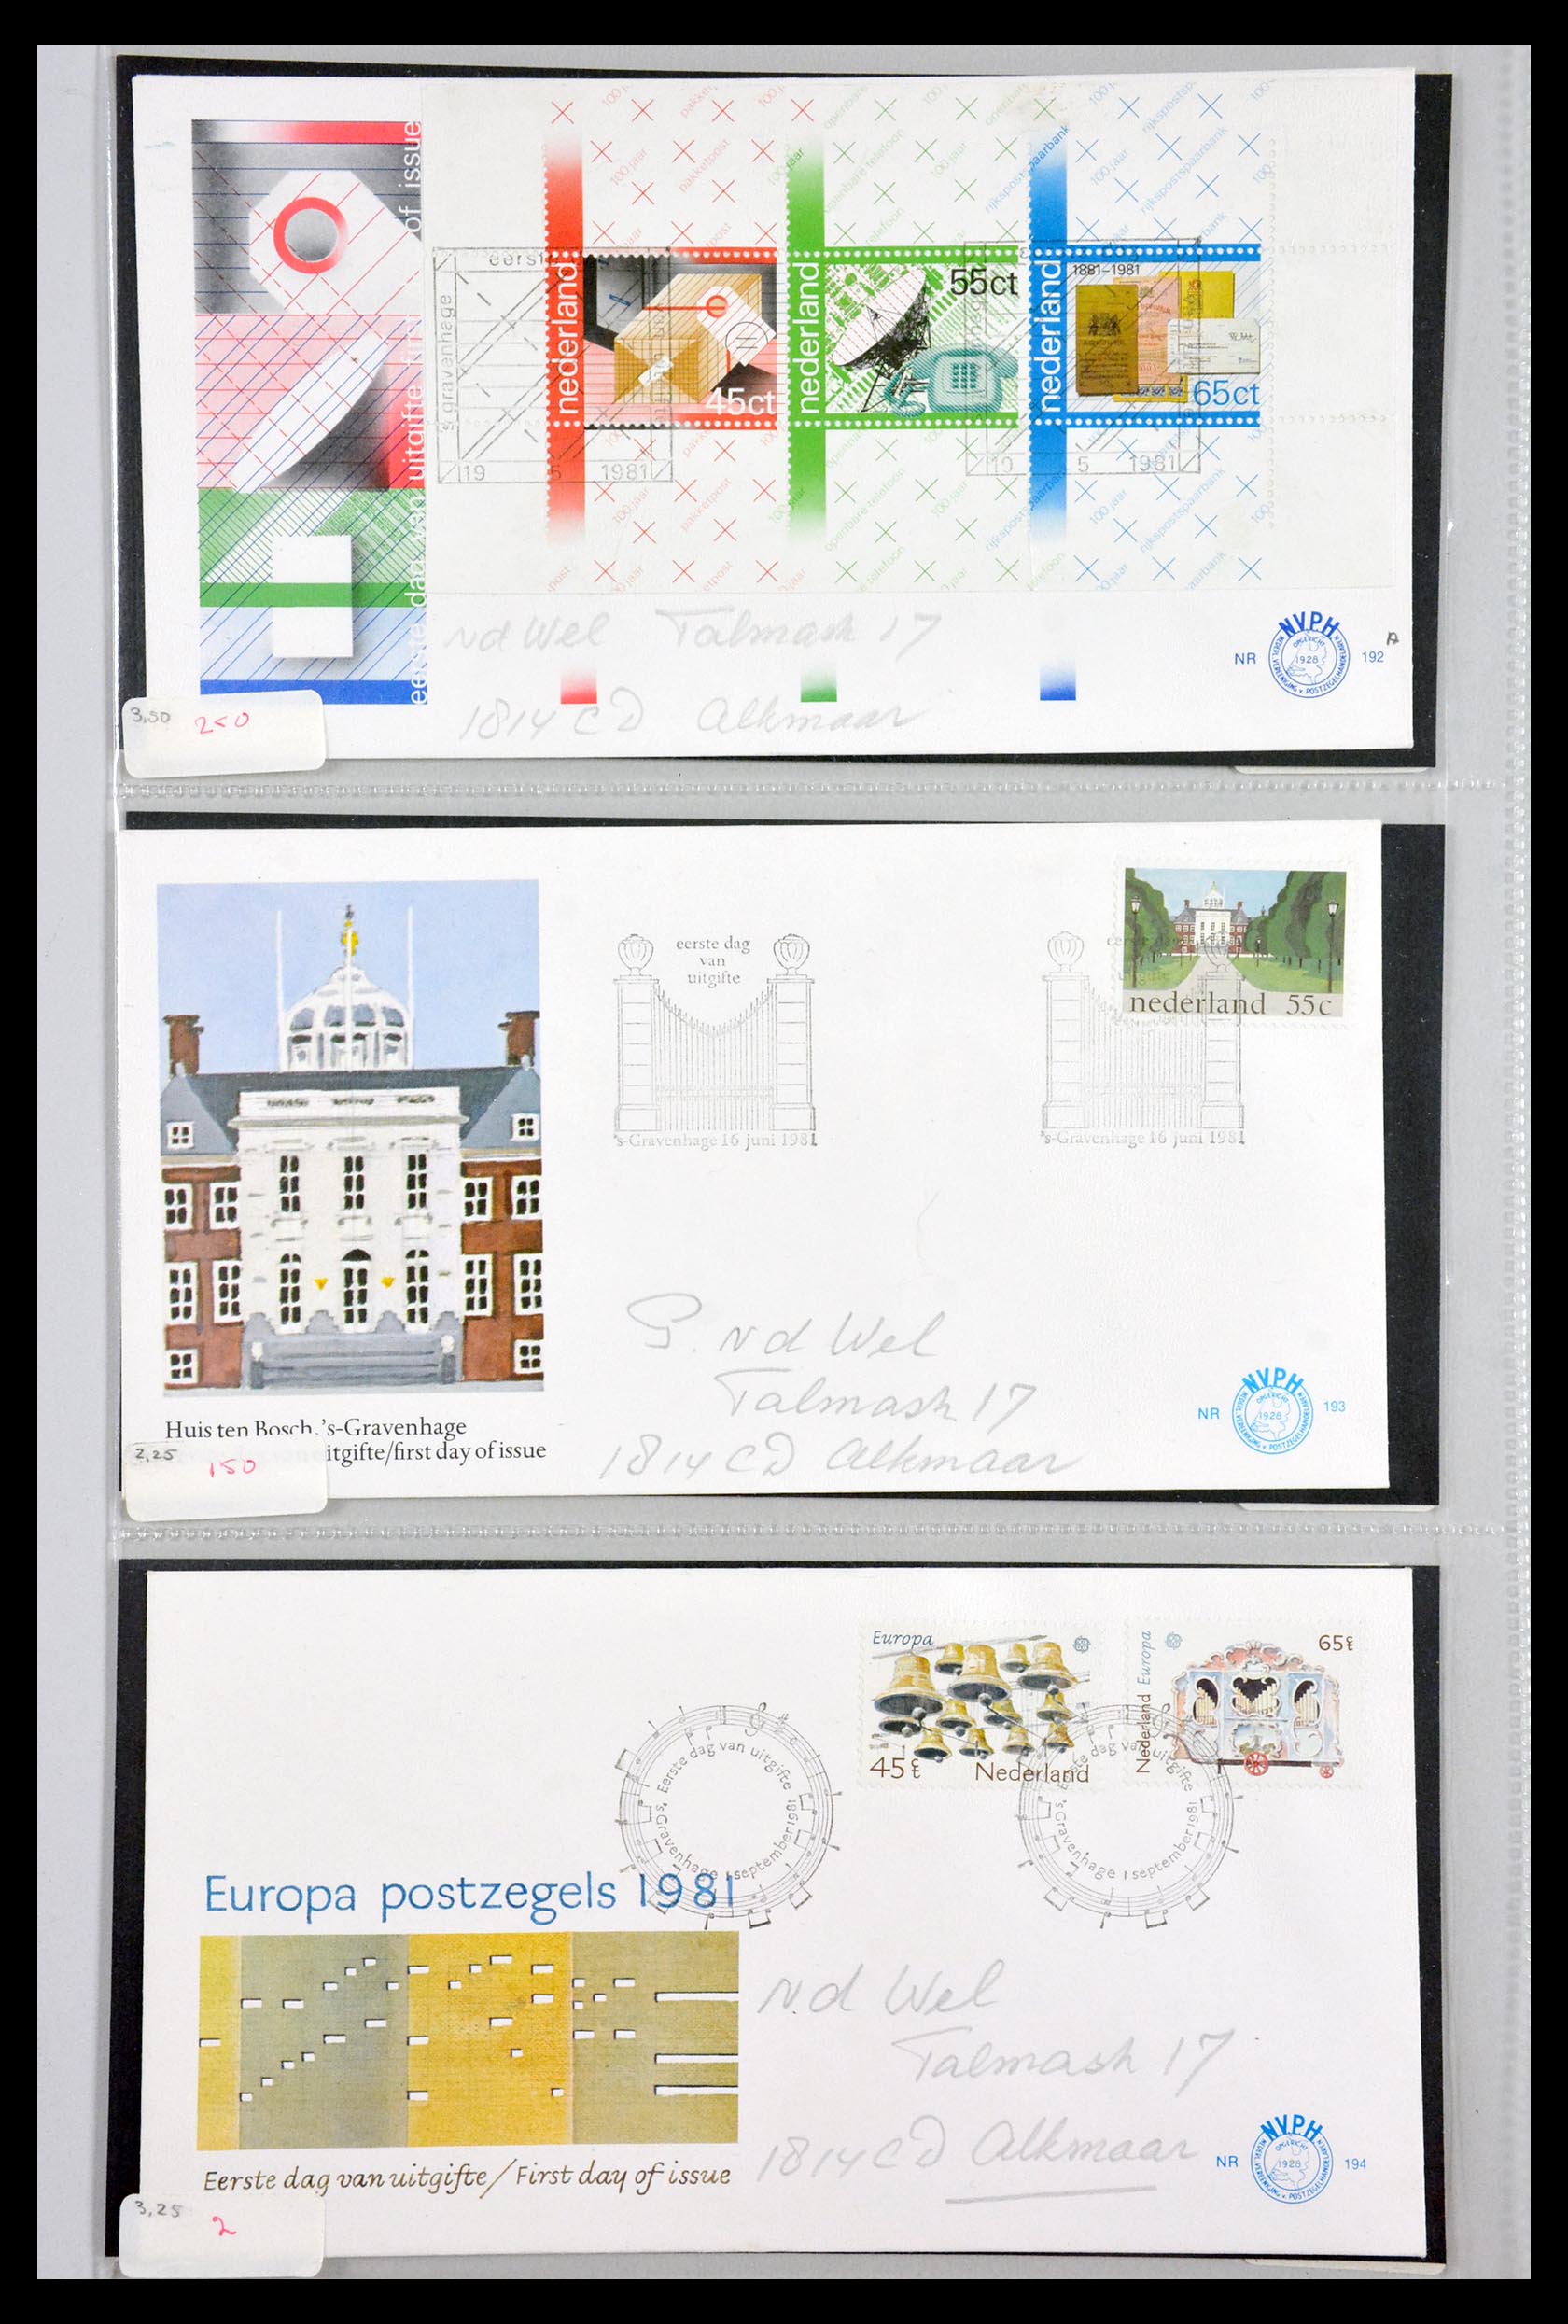 29540 071 - 29540 Netherlands 1950-1982 FDC's.